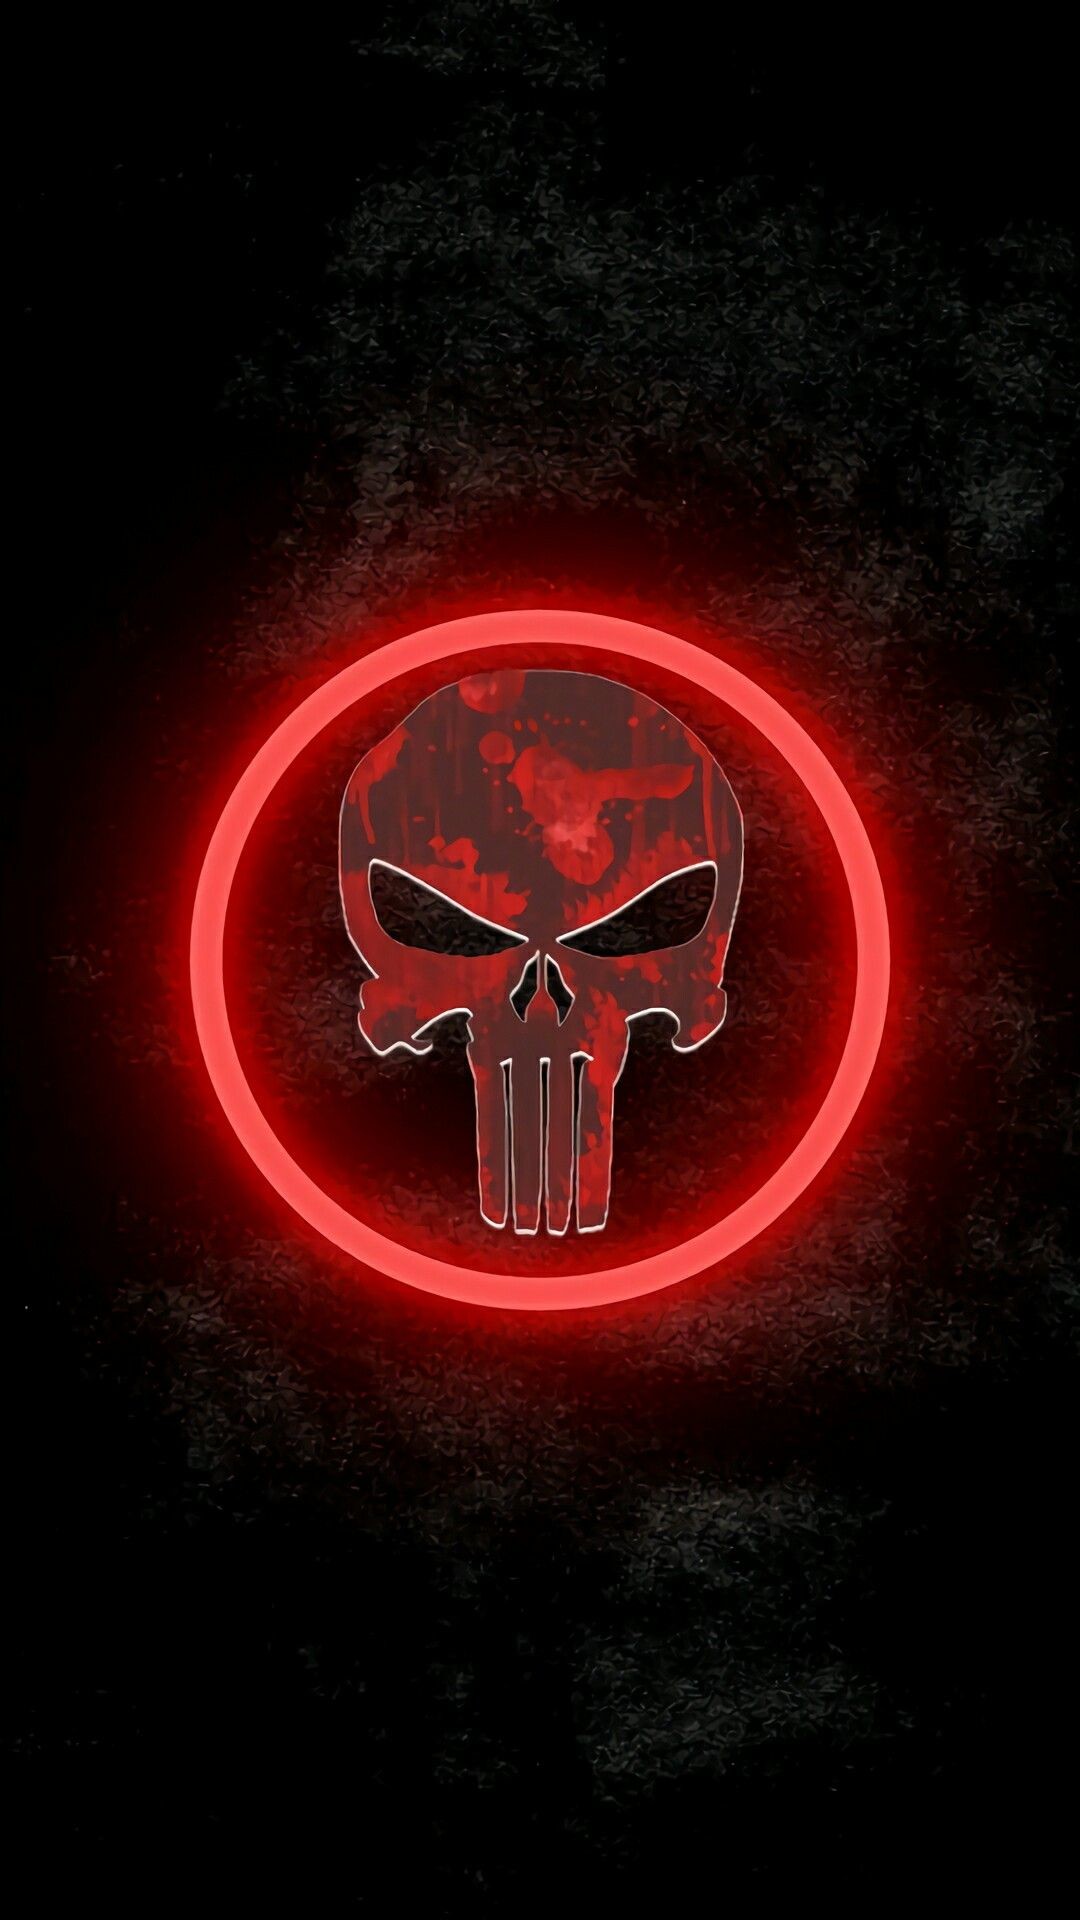 1080x1920 And the Punisher's gun barrel glows blood red!